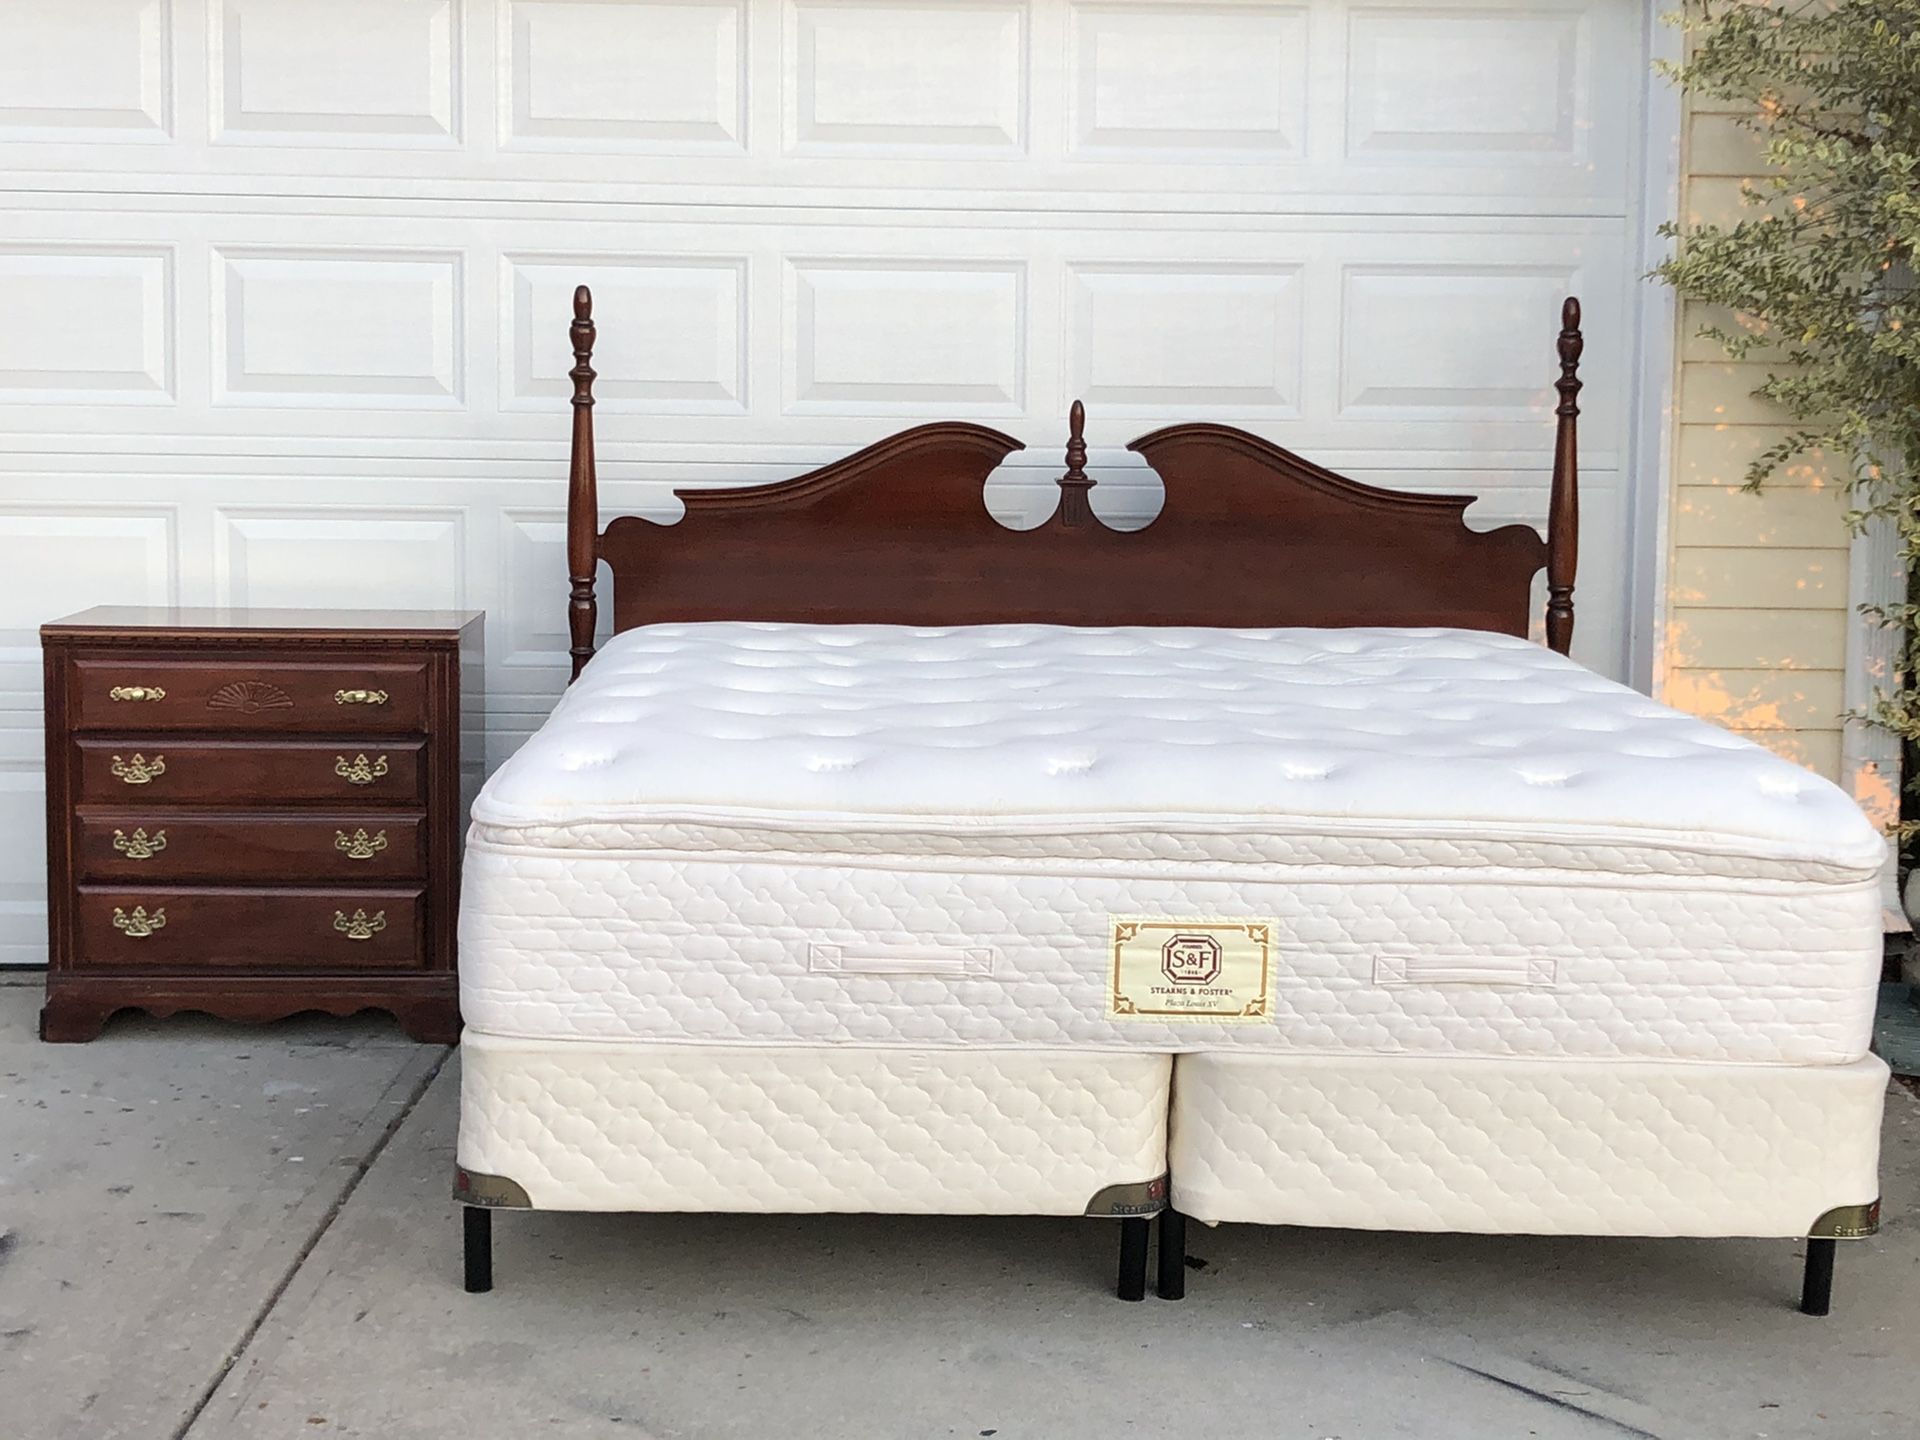 King Bedroom set with Headboard, Stern & Foster Mattress, boxsprings, rail and Broyhill Nightstand. Very good condition. Delivery available. Hablar e